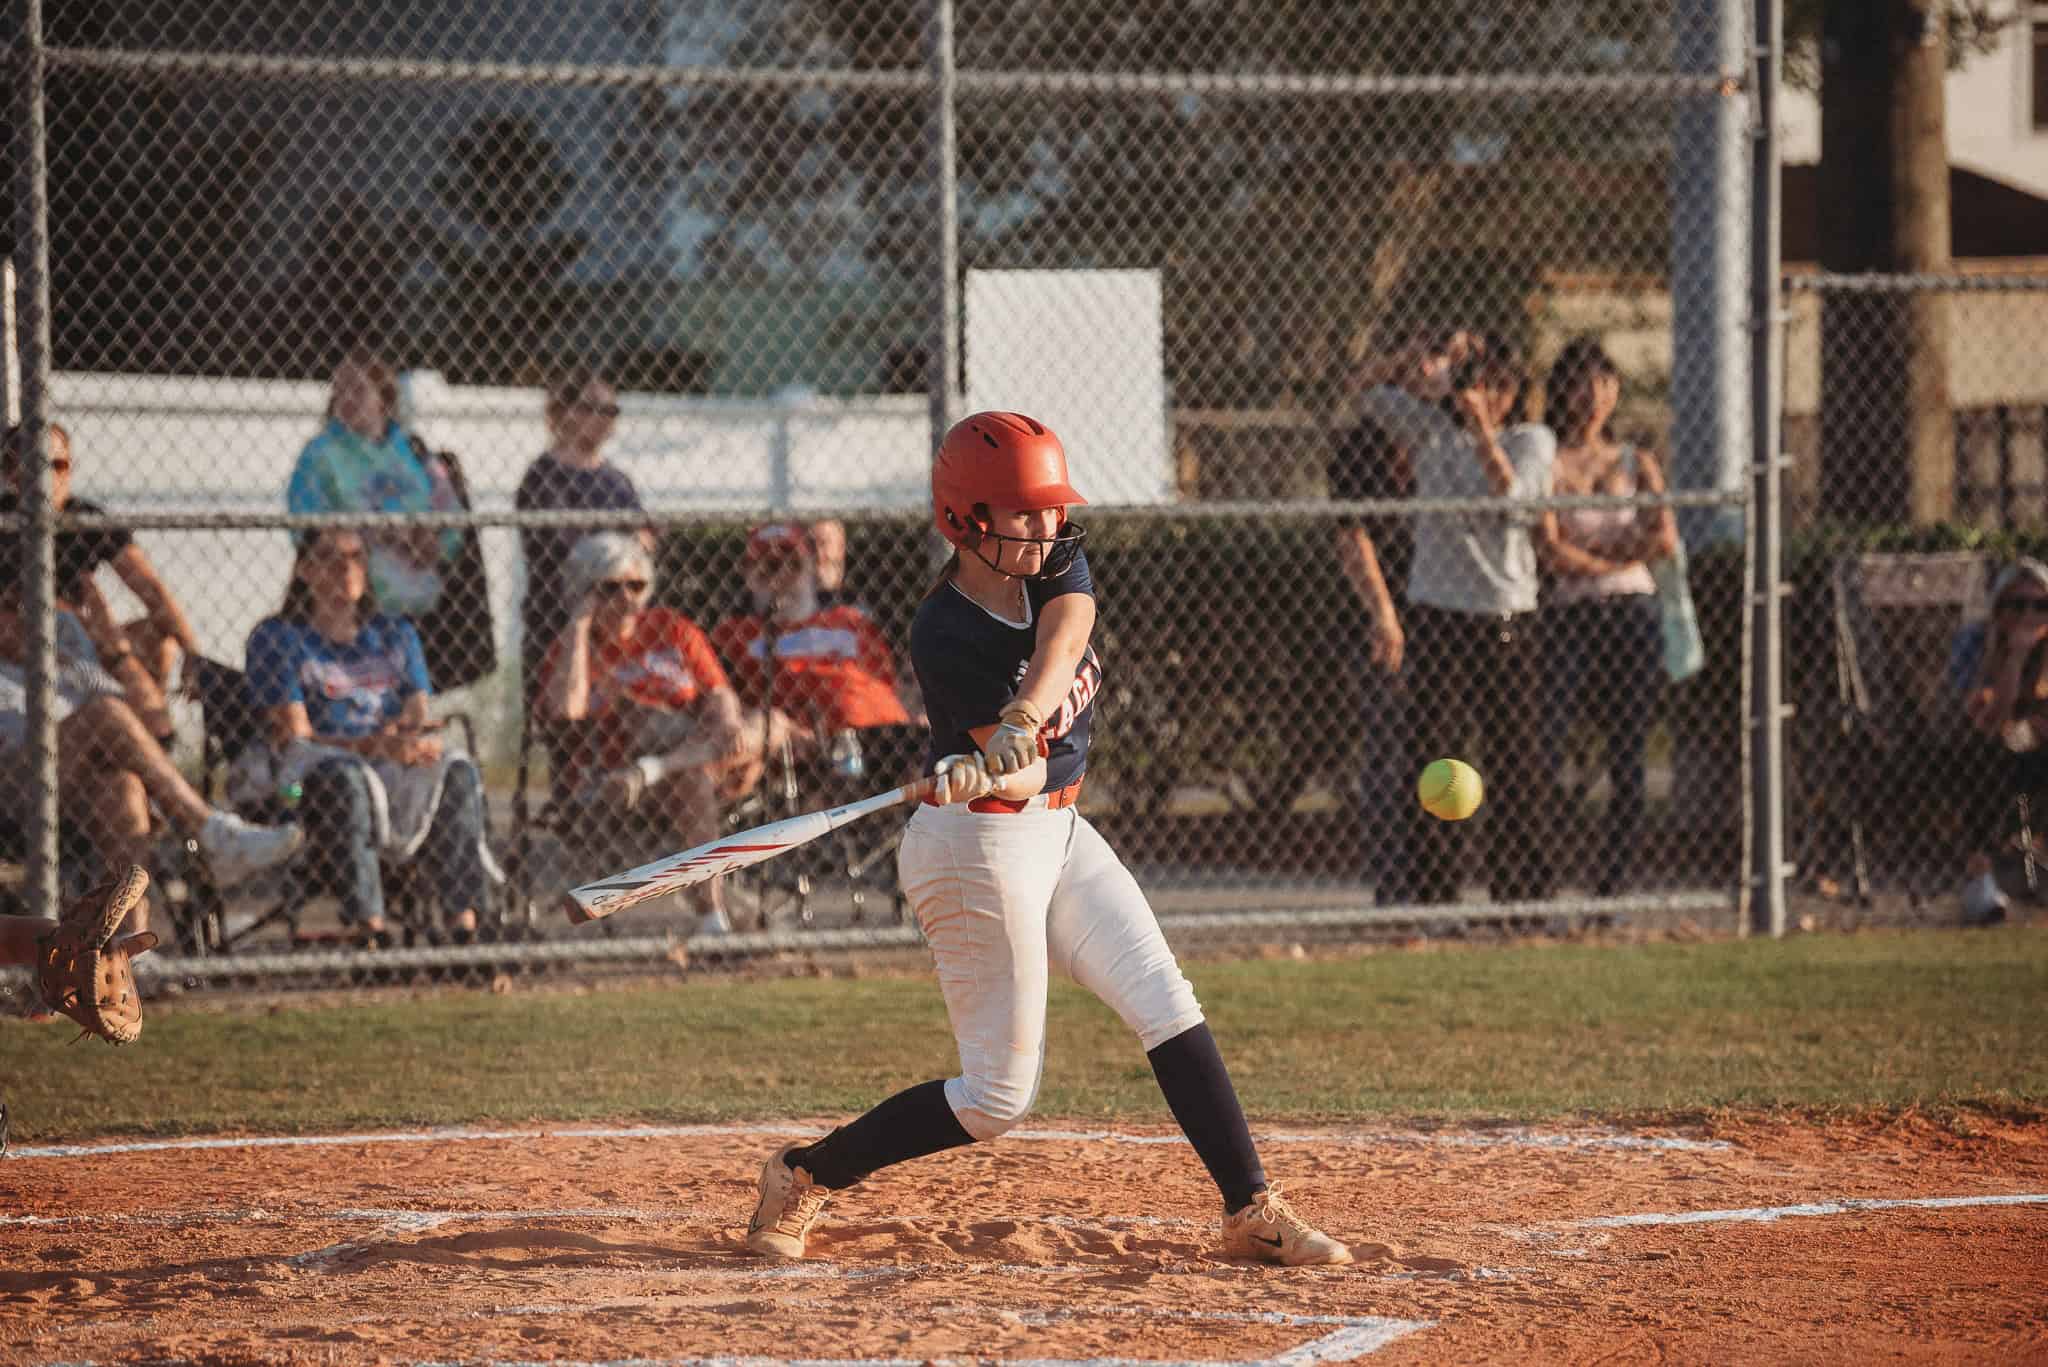 Springstead's Alexis Adelman at bat at Thursday's game against Citrus. [Photo by Cynthia Leota]